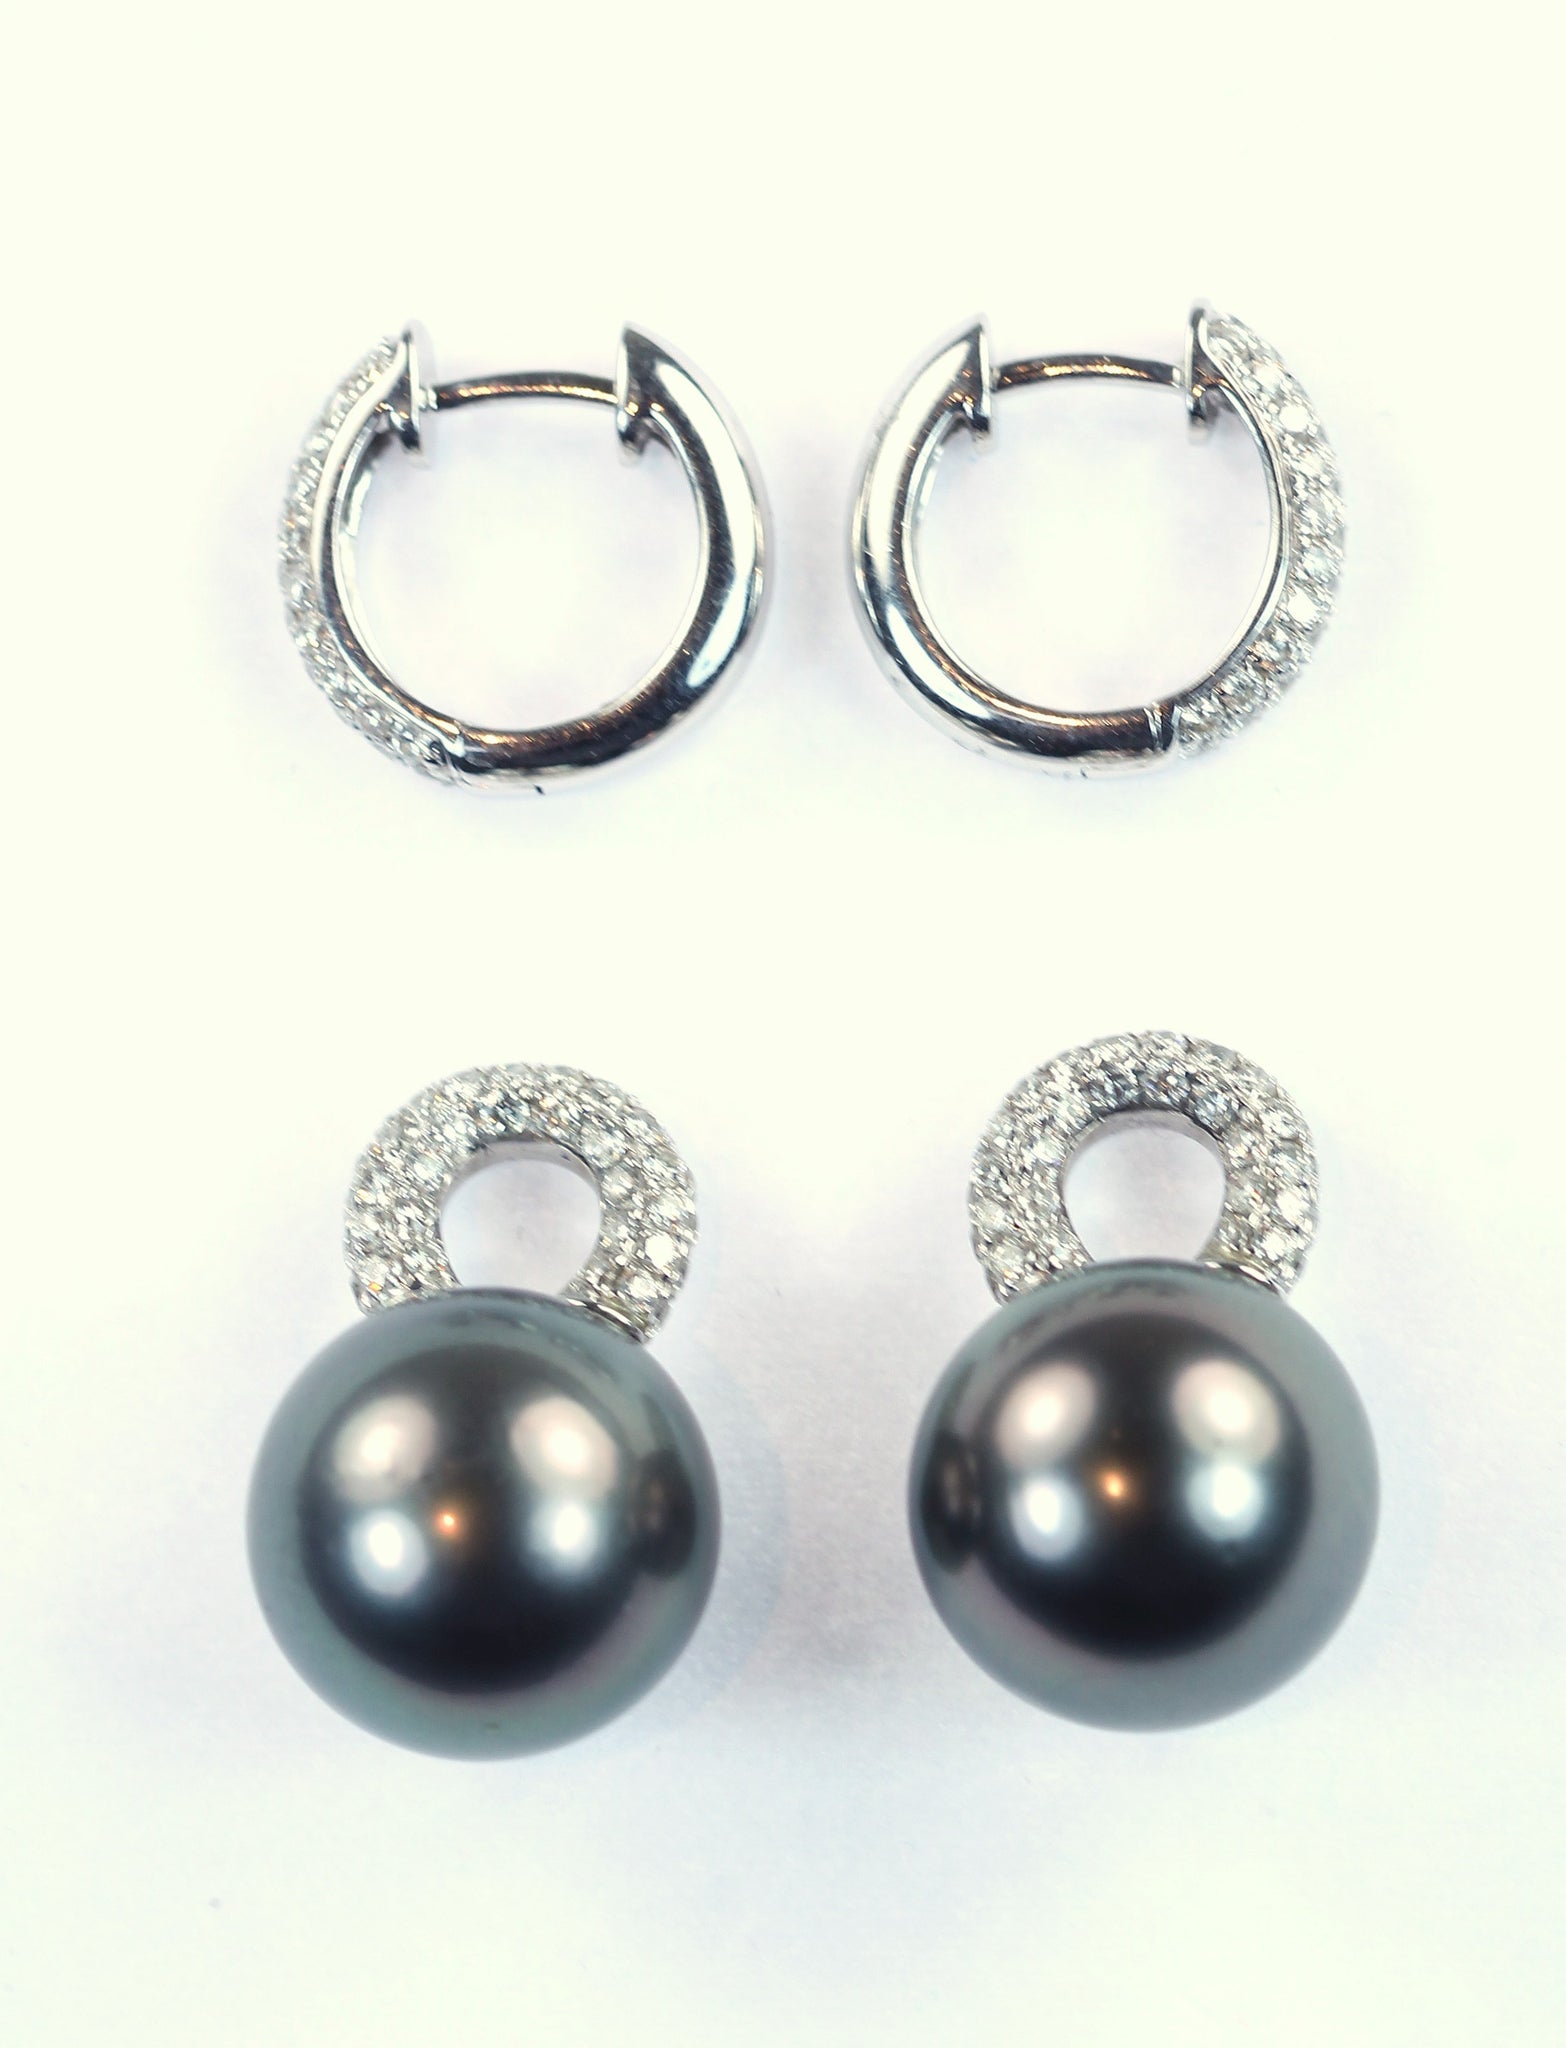 Vintage Diamond Hoops with Removable Tahitian Pearls, SOLD